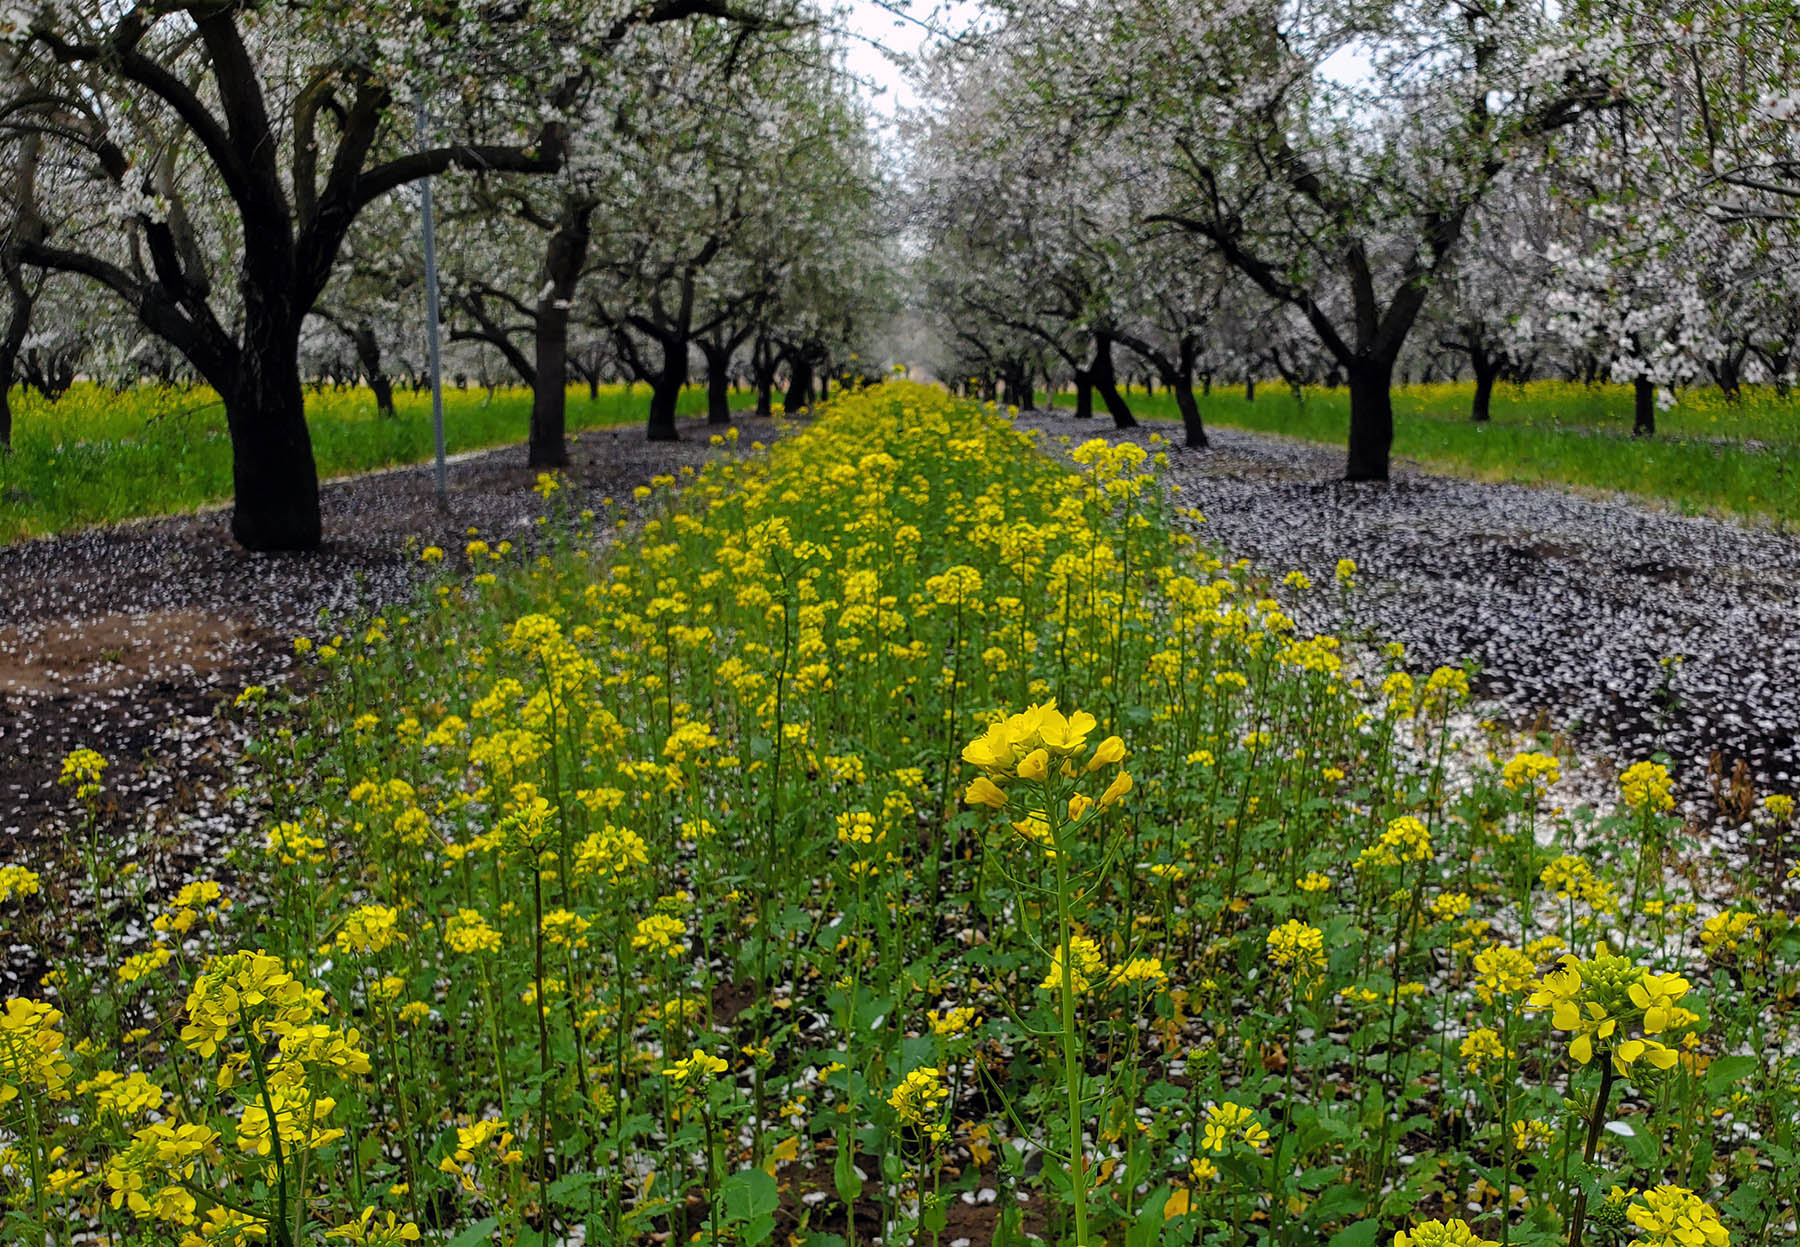 Cover crops in Ken Rapp's Orchard